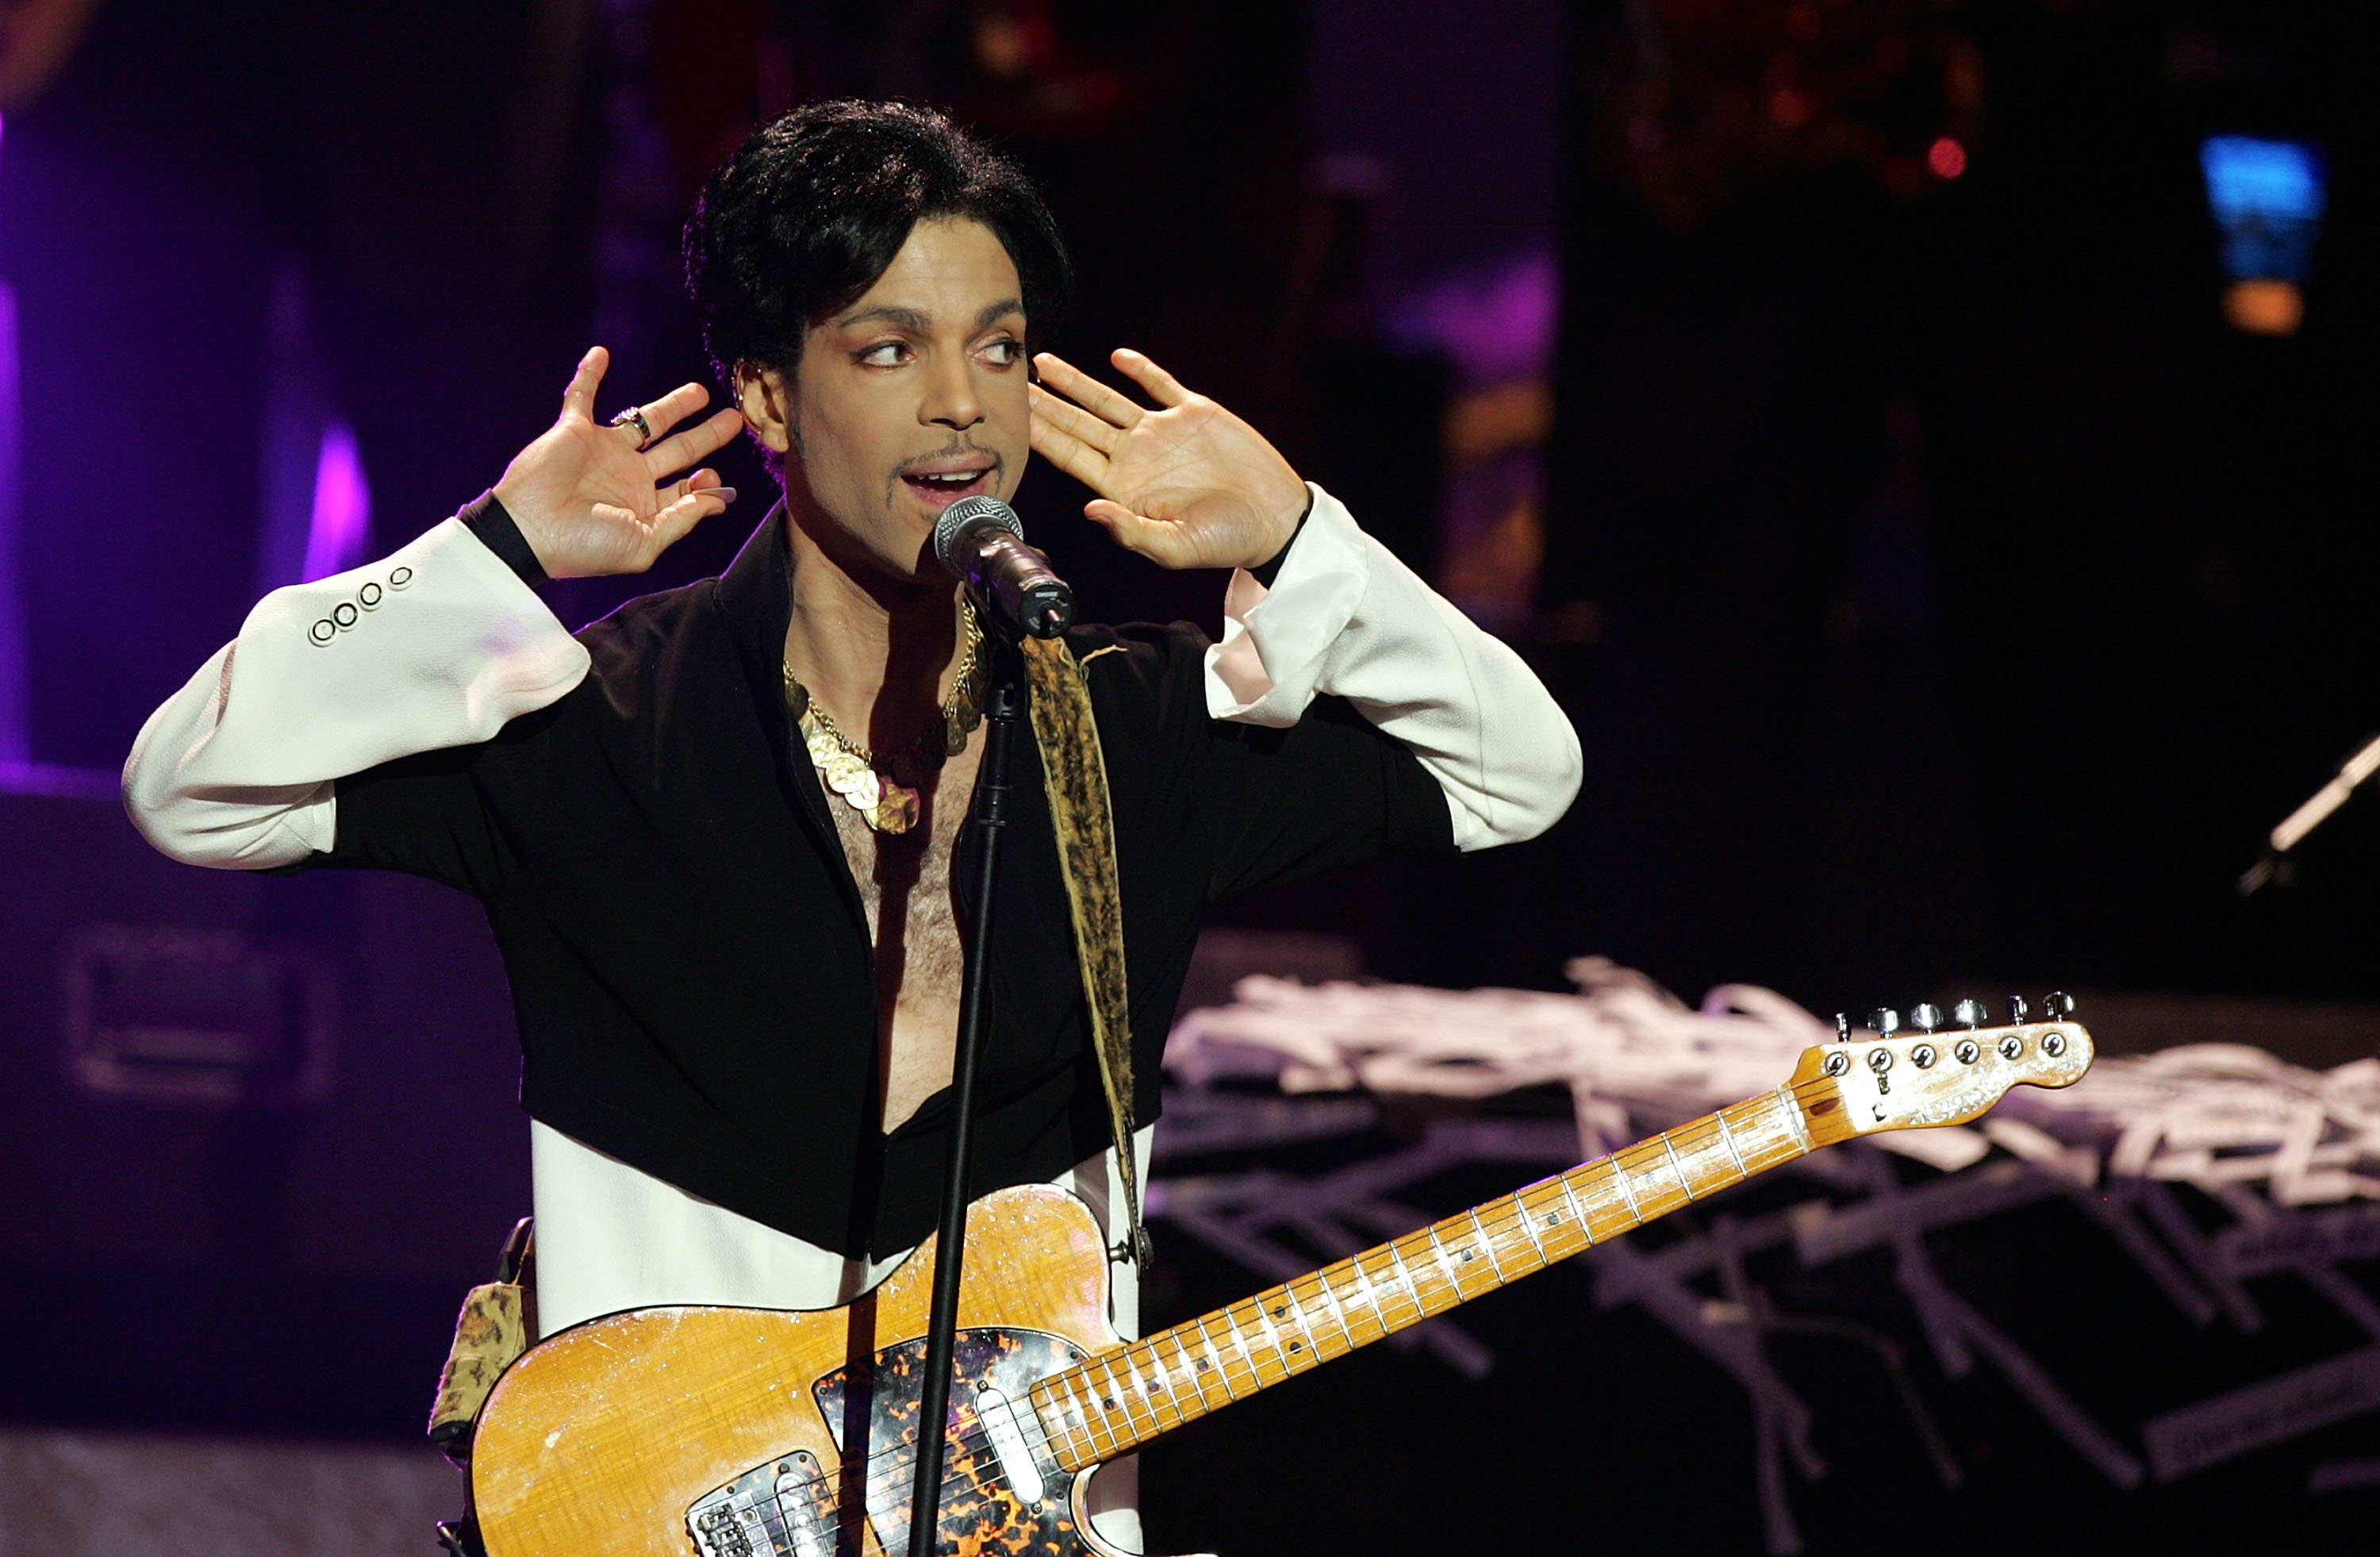 Prince performs at the 36th NAACP Image Awards on March 19, 2005 in Los Angeles, California | Source: Getty Images